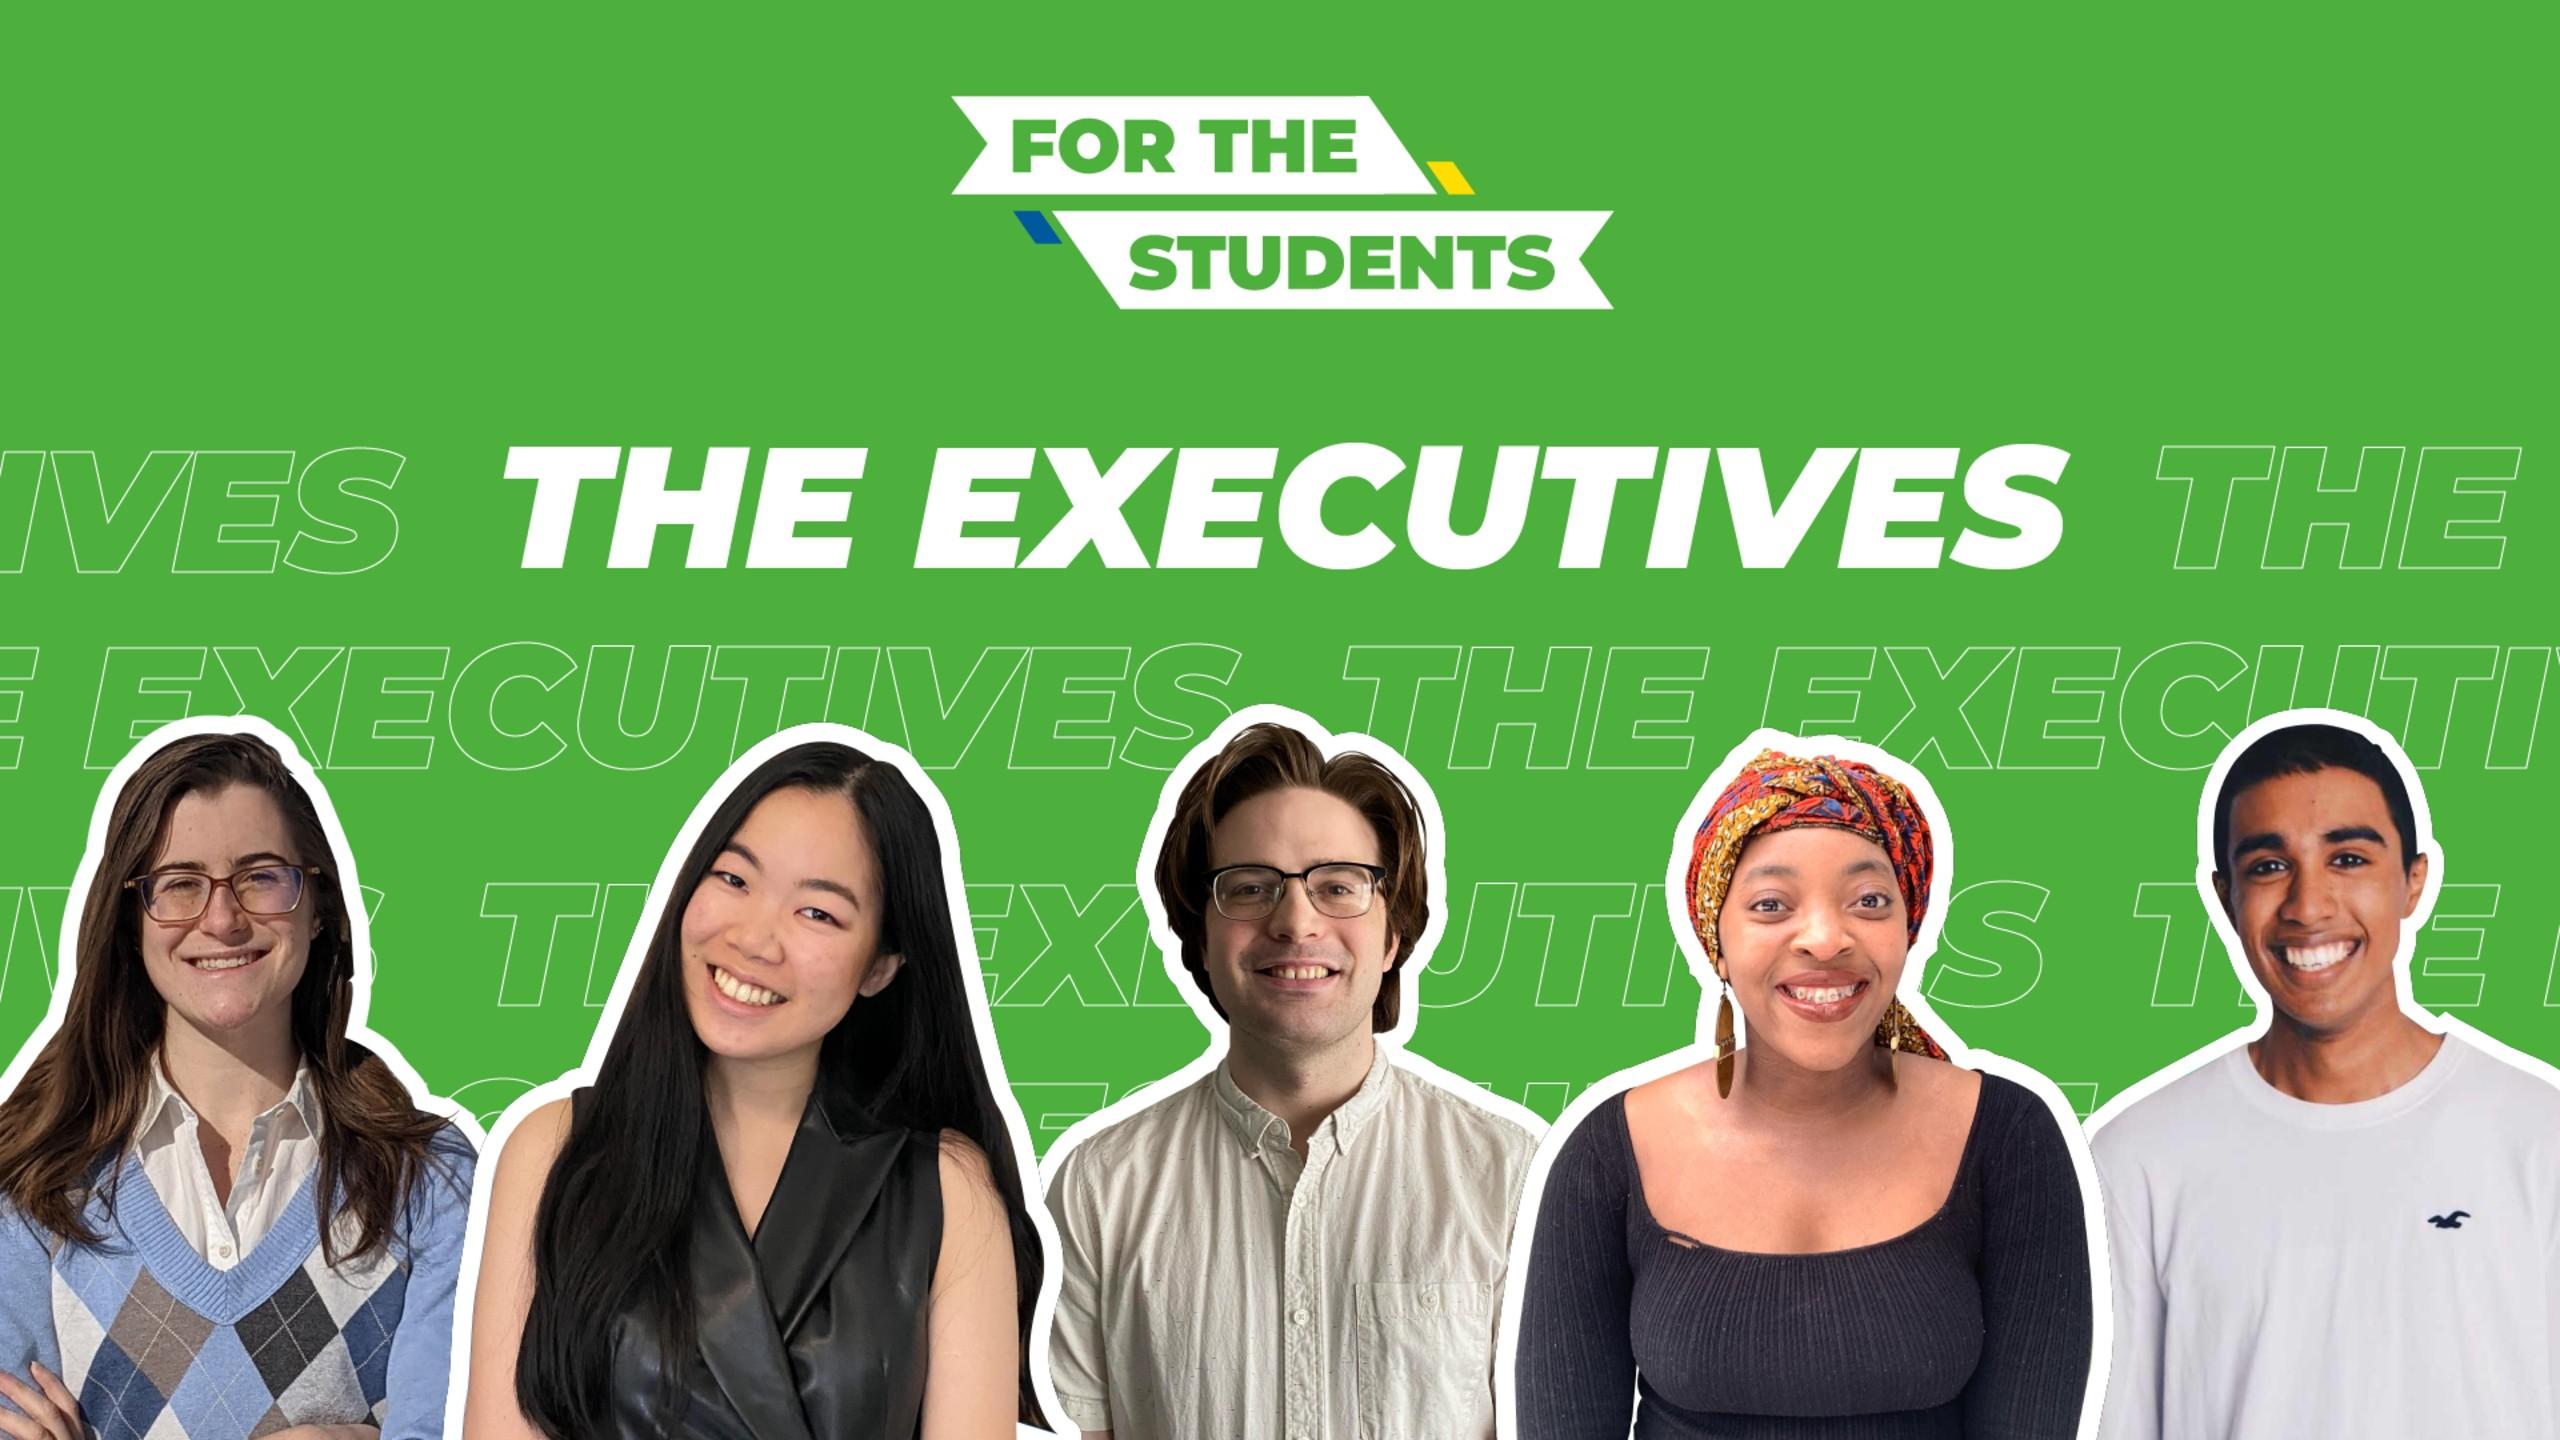 Five students pictured from the torso up with a white outline around their bodies on a green background. White text above their bodies reads "The Executives" in all capital letters. Above that in white boxes with green text reads "For The Students" in all caps.